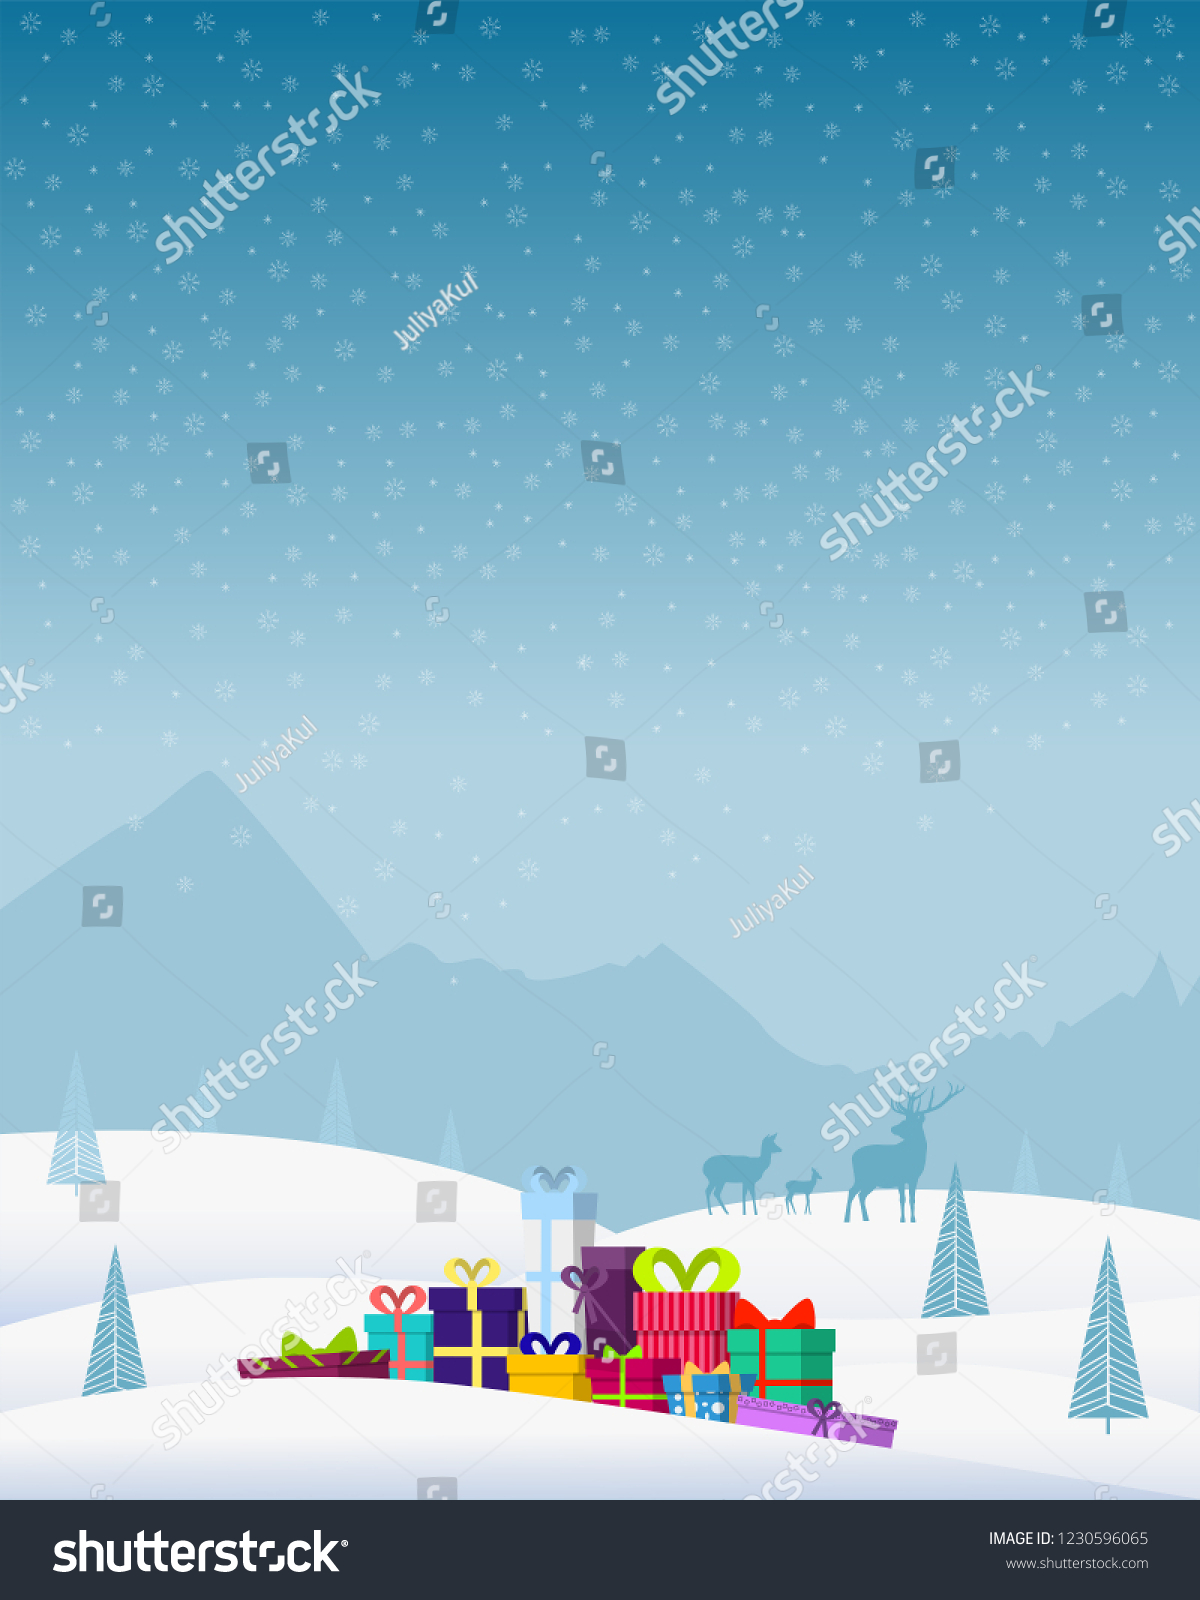 Winter Christmas background with mountains, snow, deer, pine trees, gifts and snowflakes. Festive colorful background. Vector illustration. #1230596065